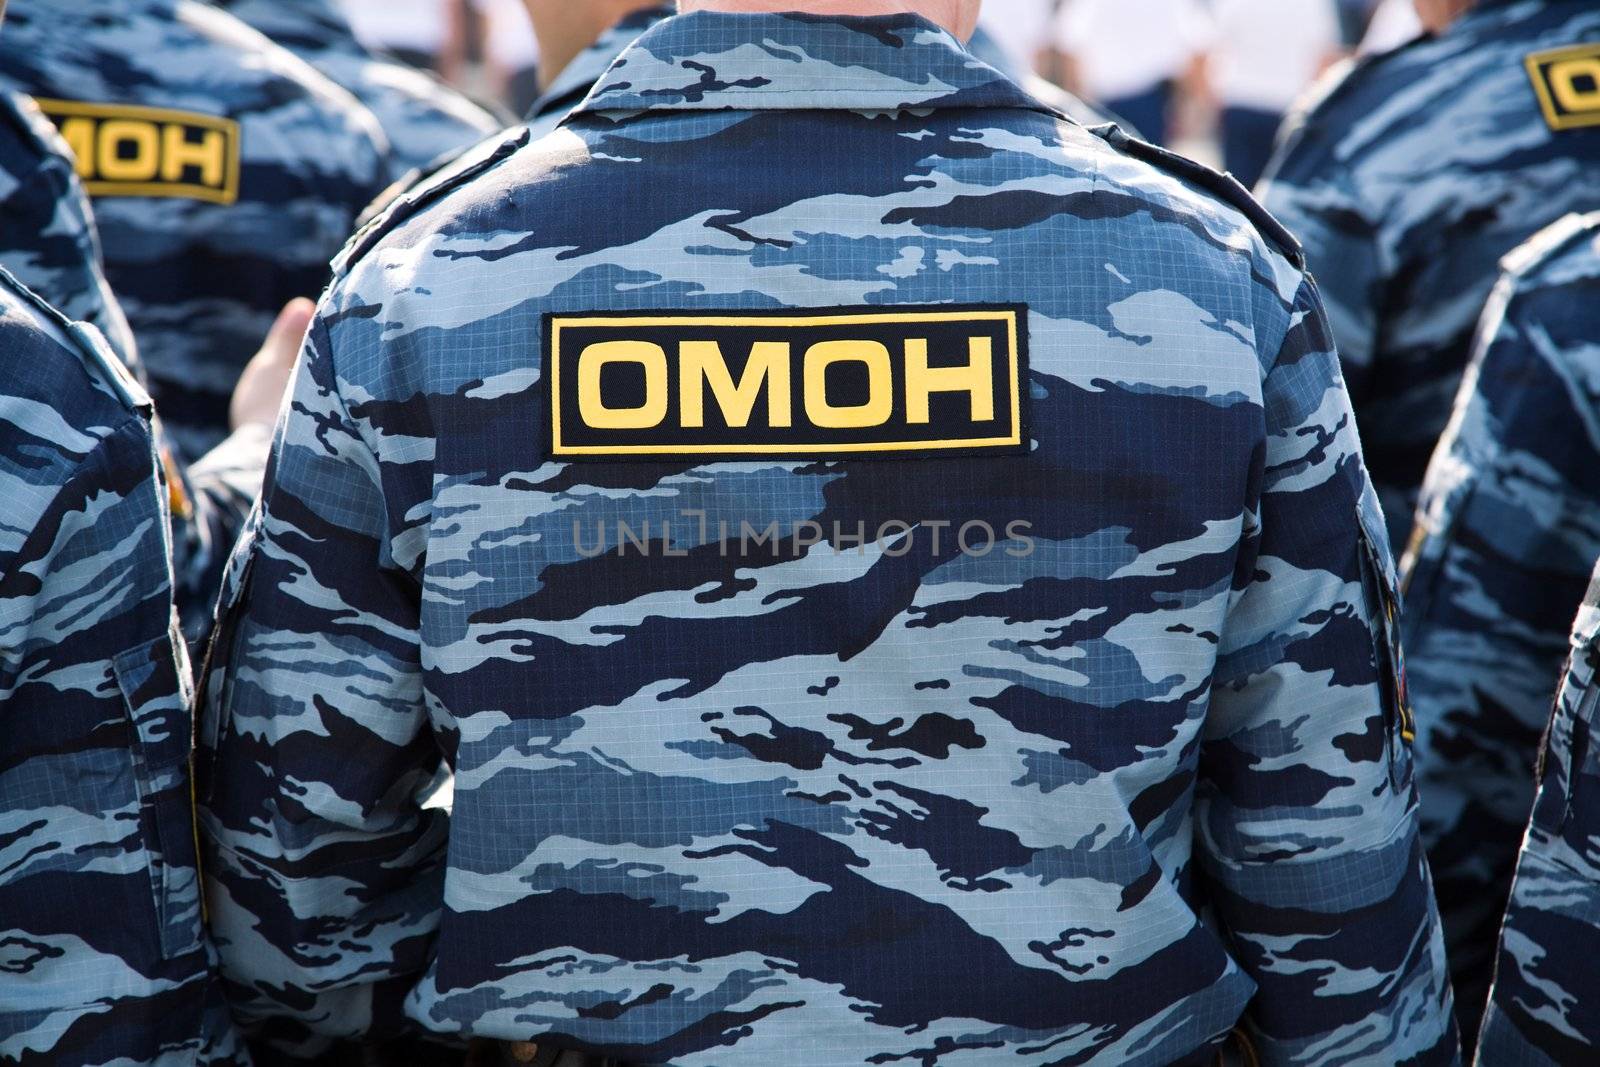 OMON (Russian special police squad) by Kuzma